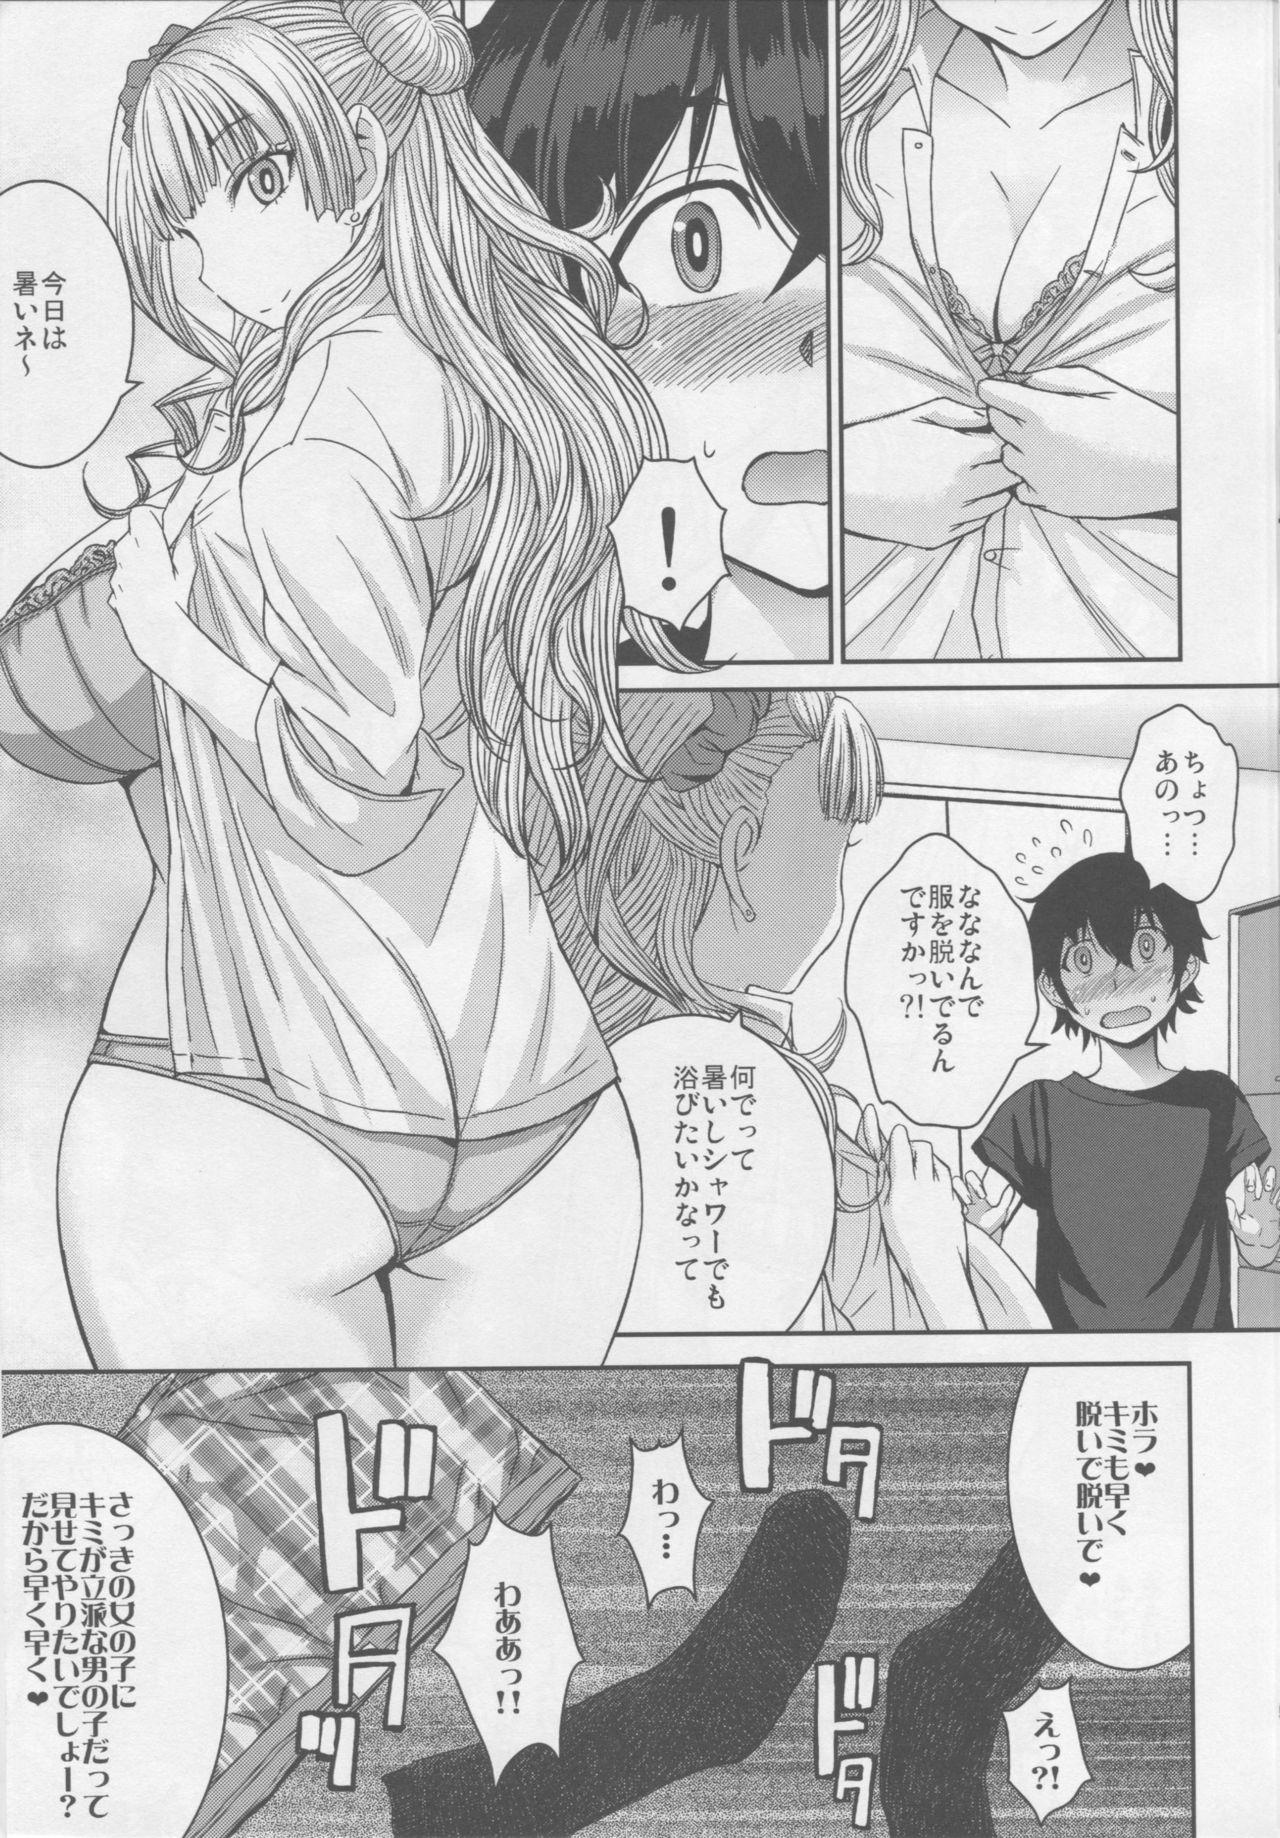 Gemendo Boy Meets Gal - Oshiete galko chan Hairy Pussy - Page 6